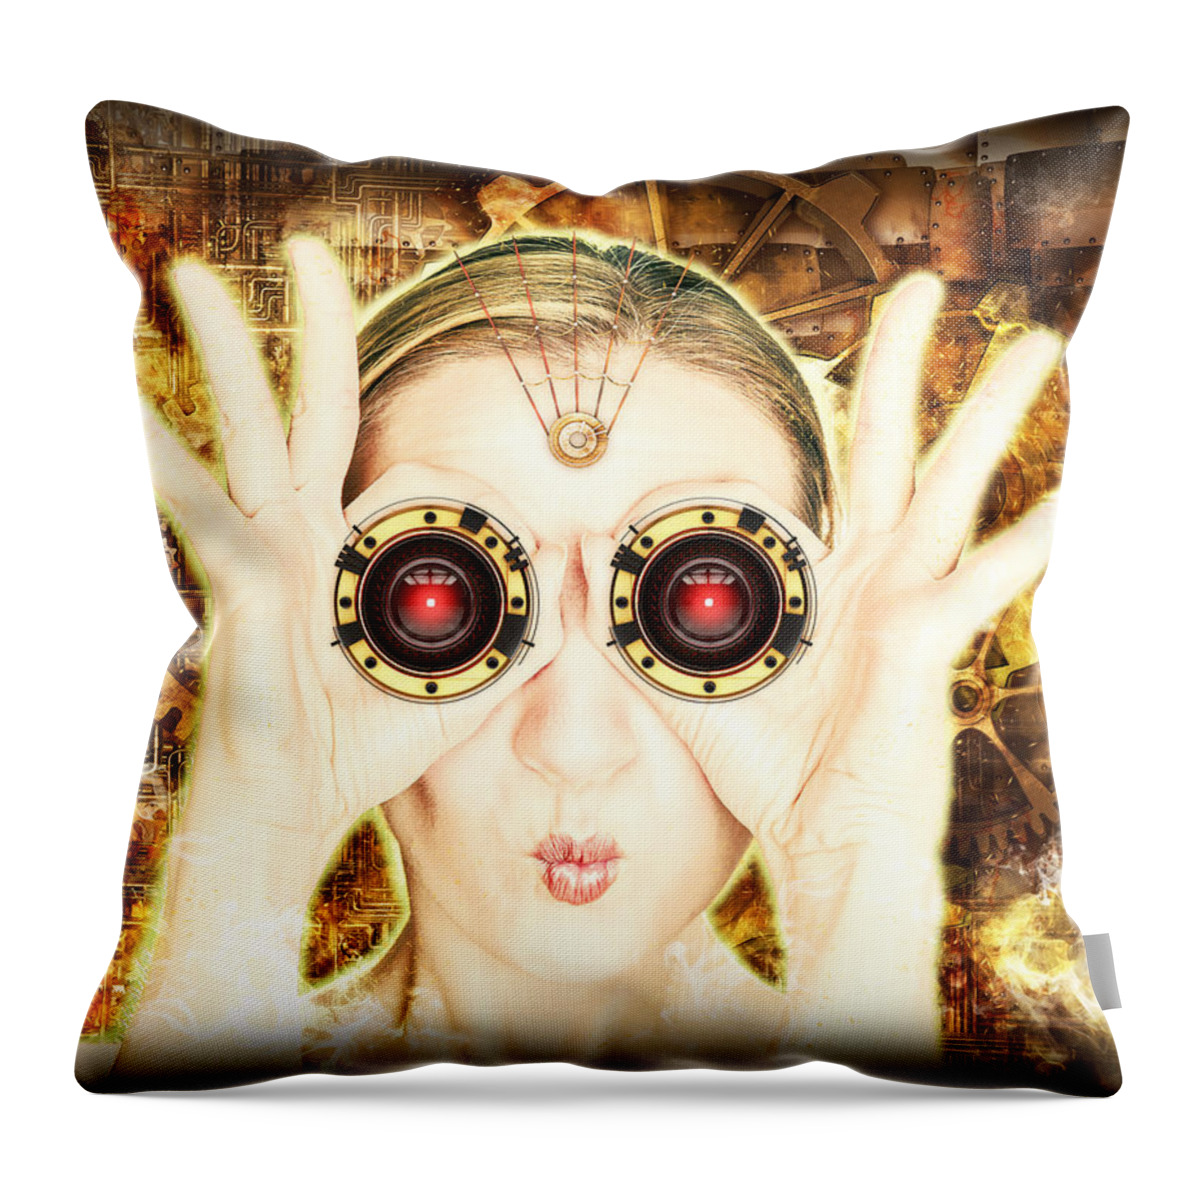 Lady Throw Pillow featuring the photograph Steam Punk Lady With Bins by Anthony Murphy